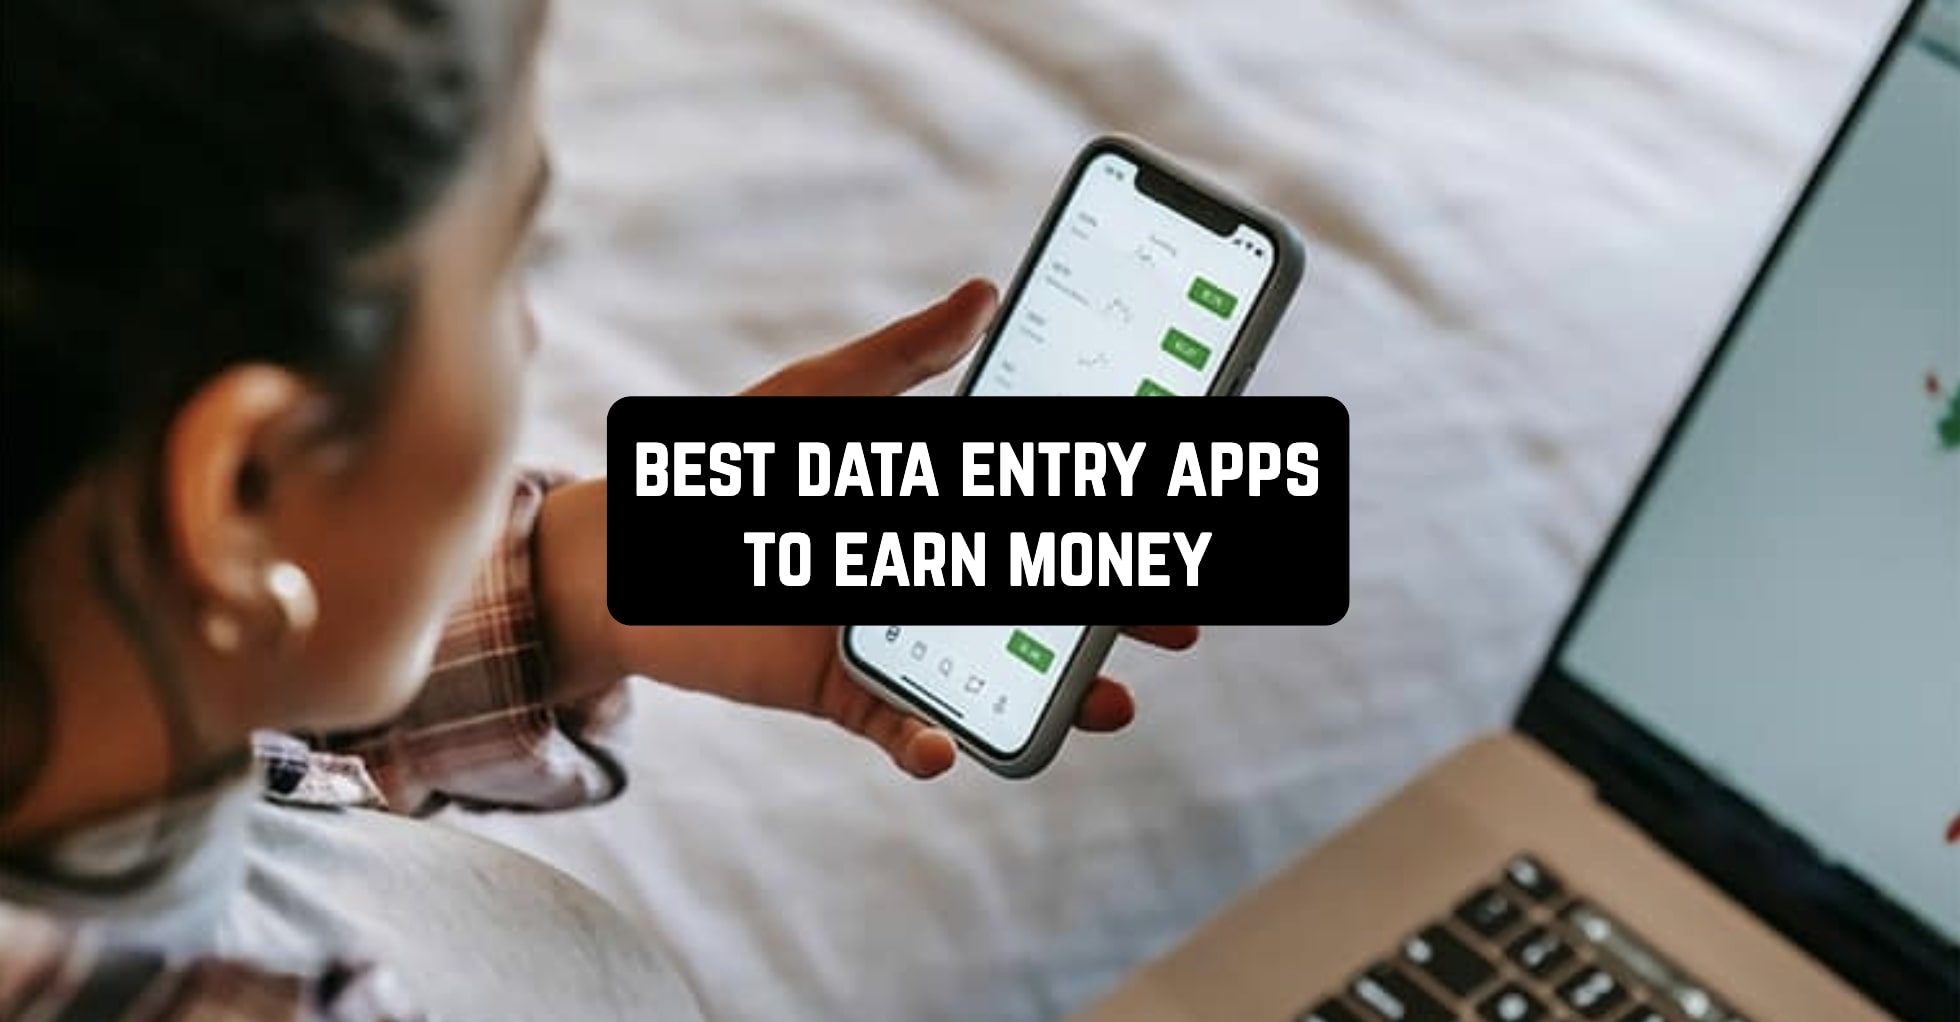 9-Best-Data-Entry-Apps-to-Earn-Money-on-Android-iOS